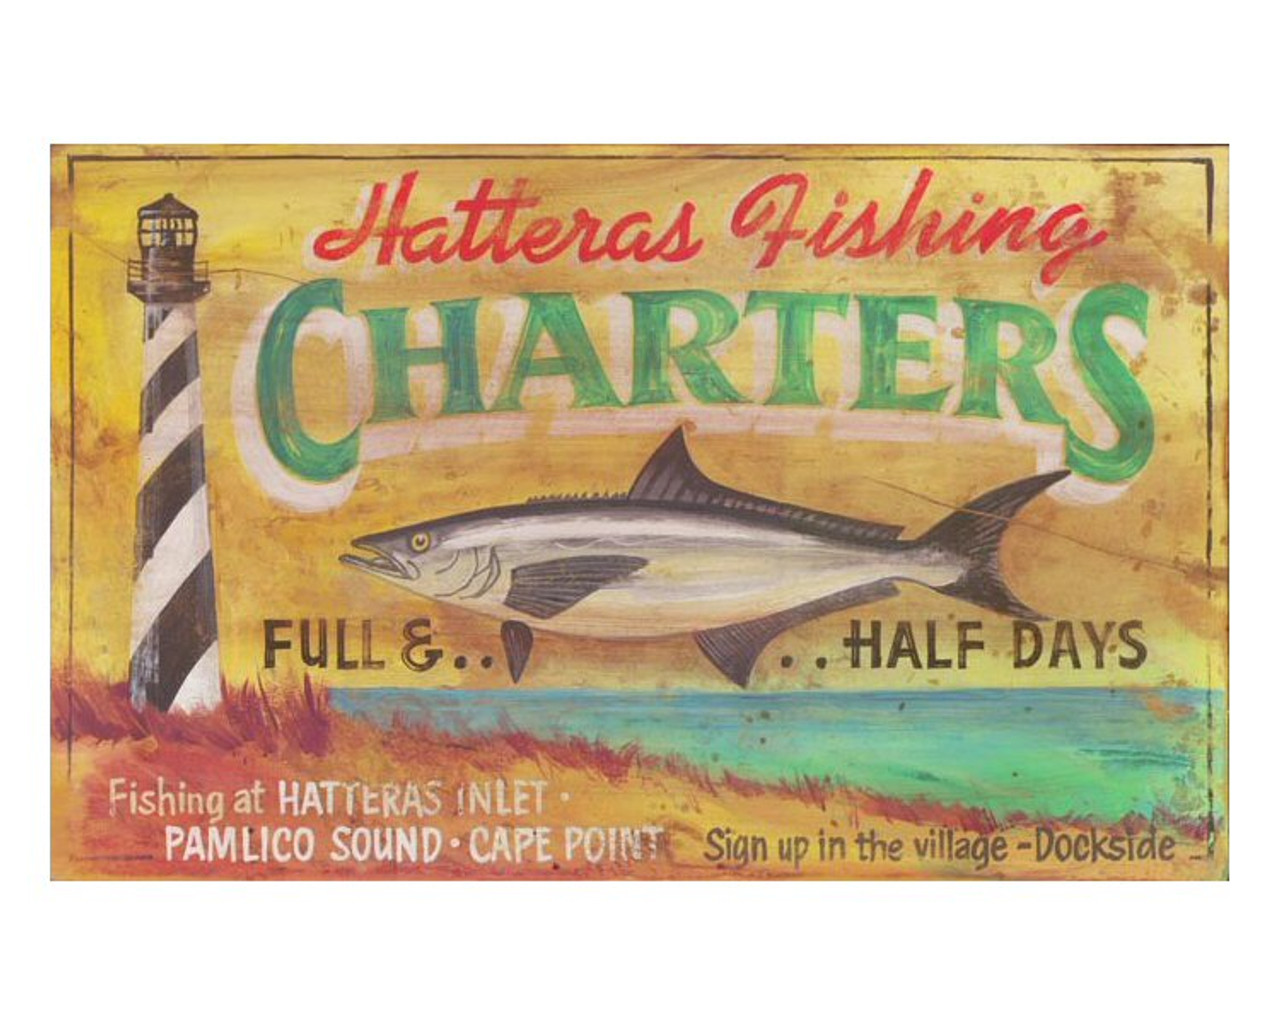 Custom Hatteras Fishing Charters Vintage Style Metal Sign - Personalized  Antique Aluminum Sign